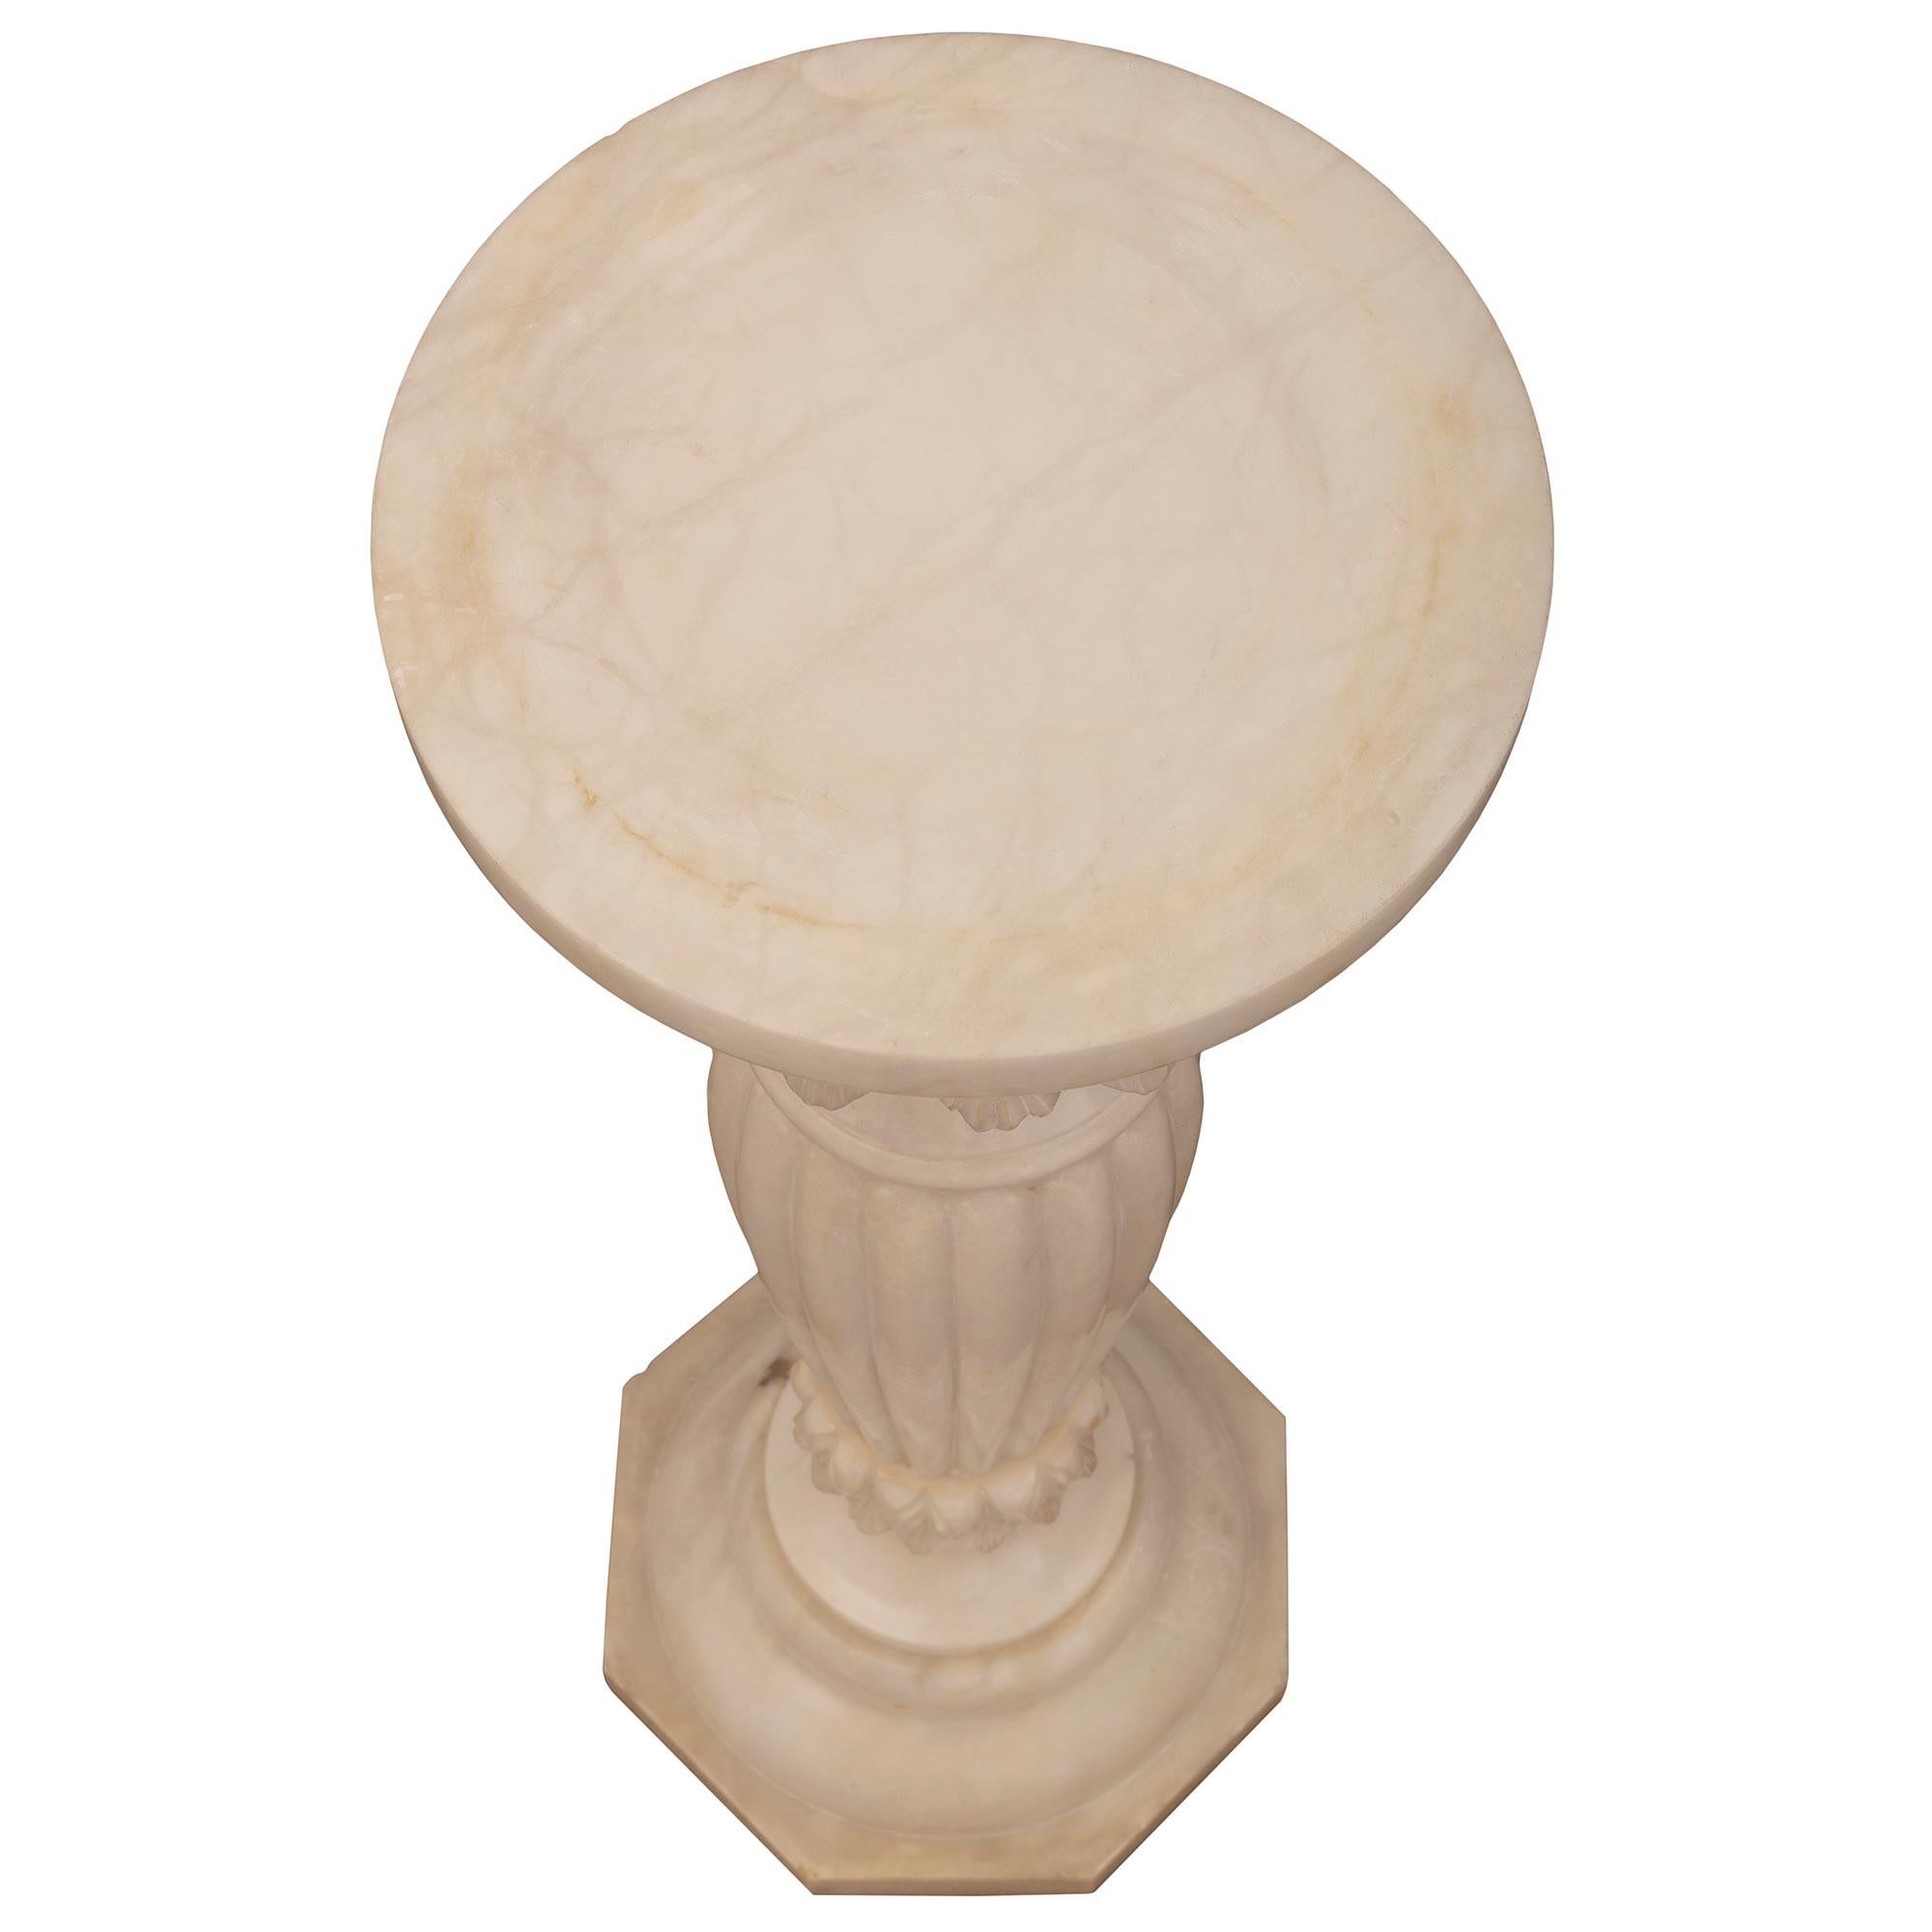 A beautiful Italian 19th century Alabaster pedestal column. The pedestal is raised by an octagonal base below a circular mottled element. The baluster shaped central support displays beautiful richly sculpted foliate designs and an impressive reeded